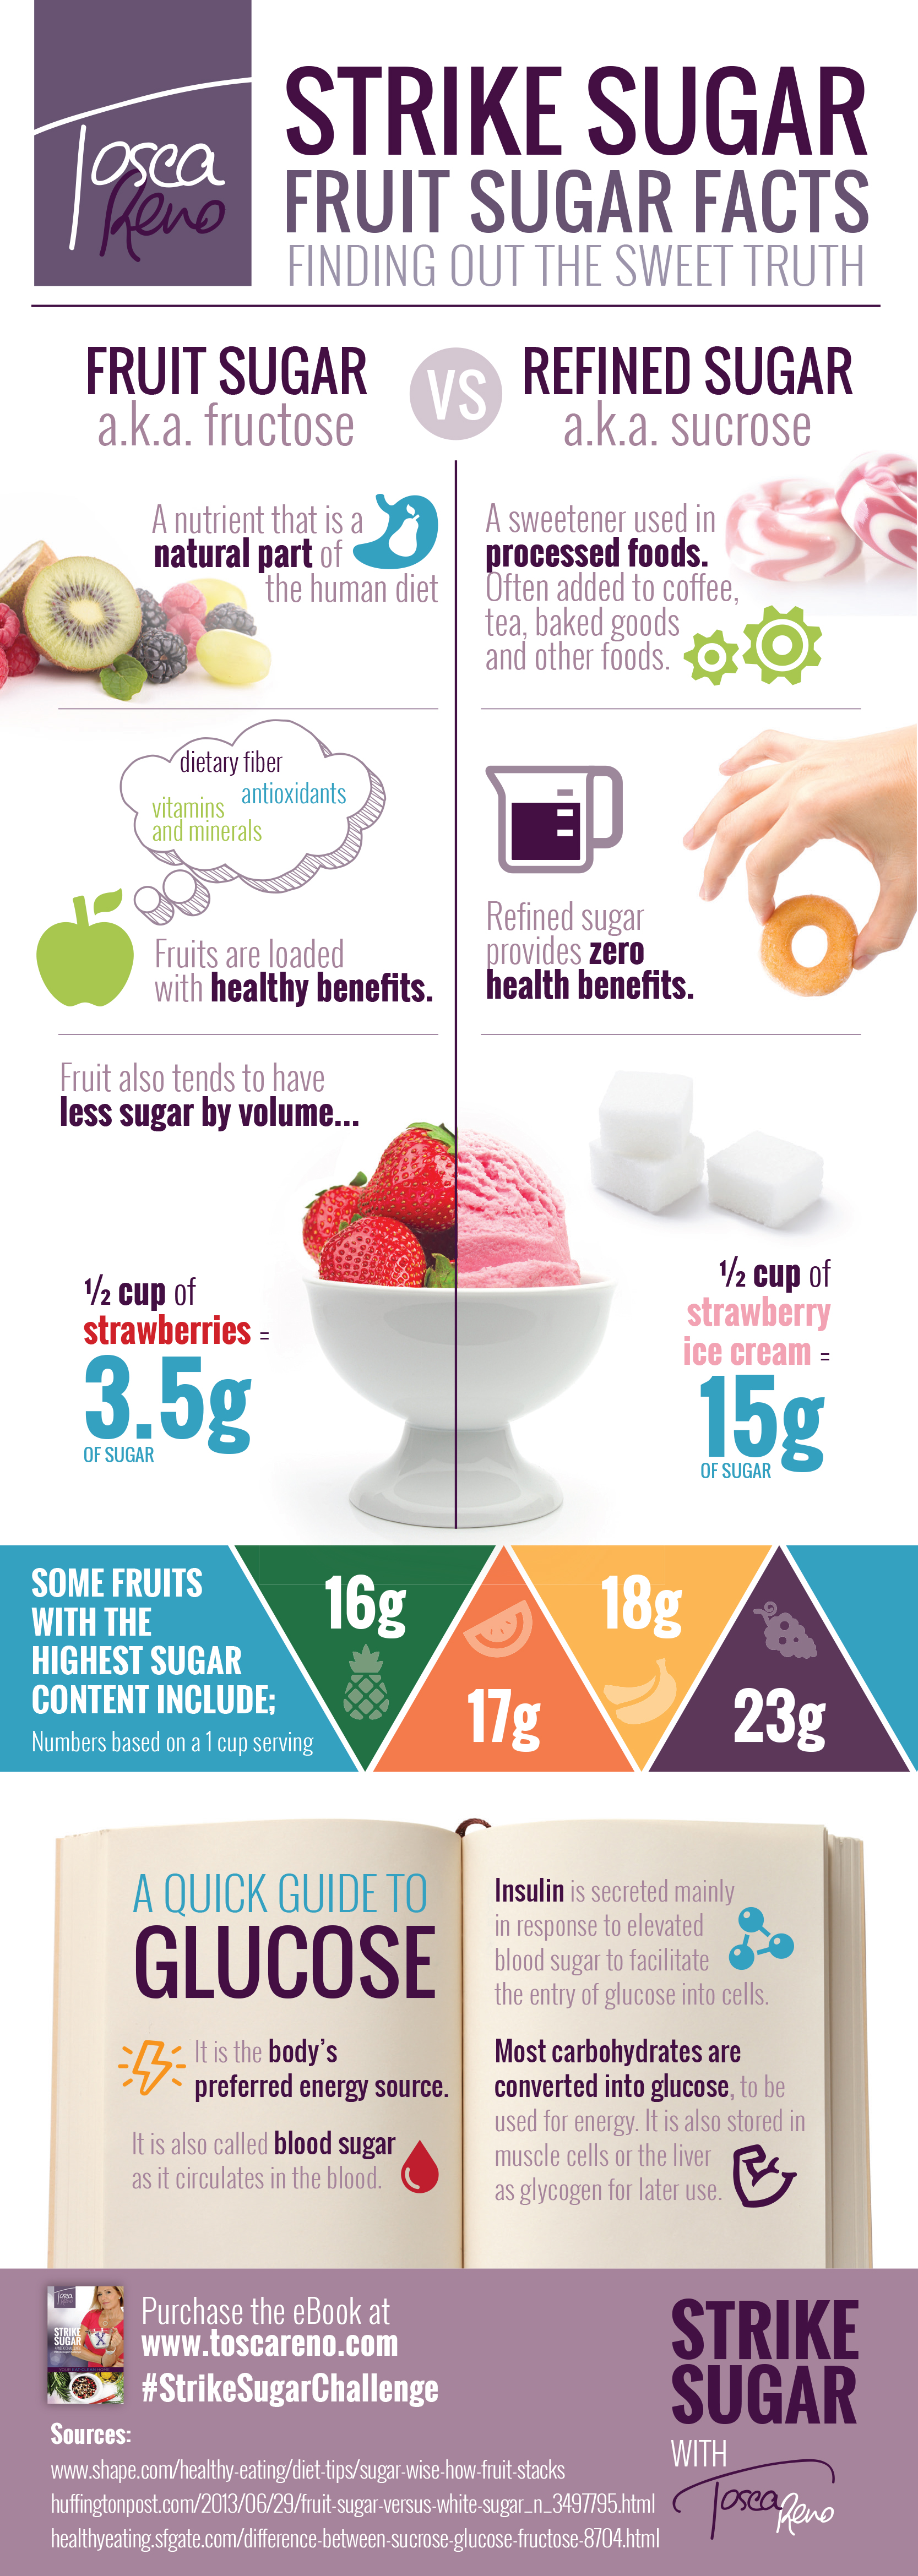 Refined Sugar Vs. Fruit Sugar: What Are The Differences? Infographic